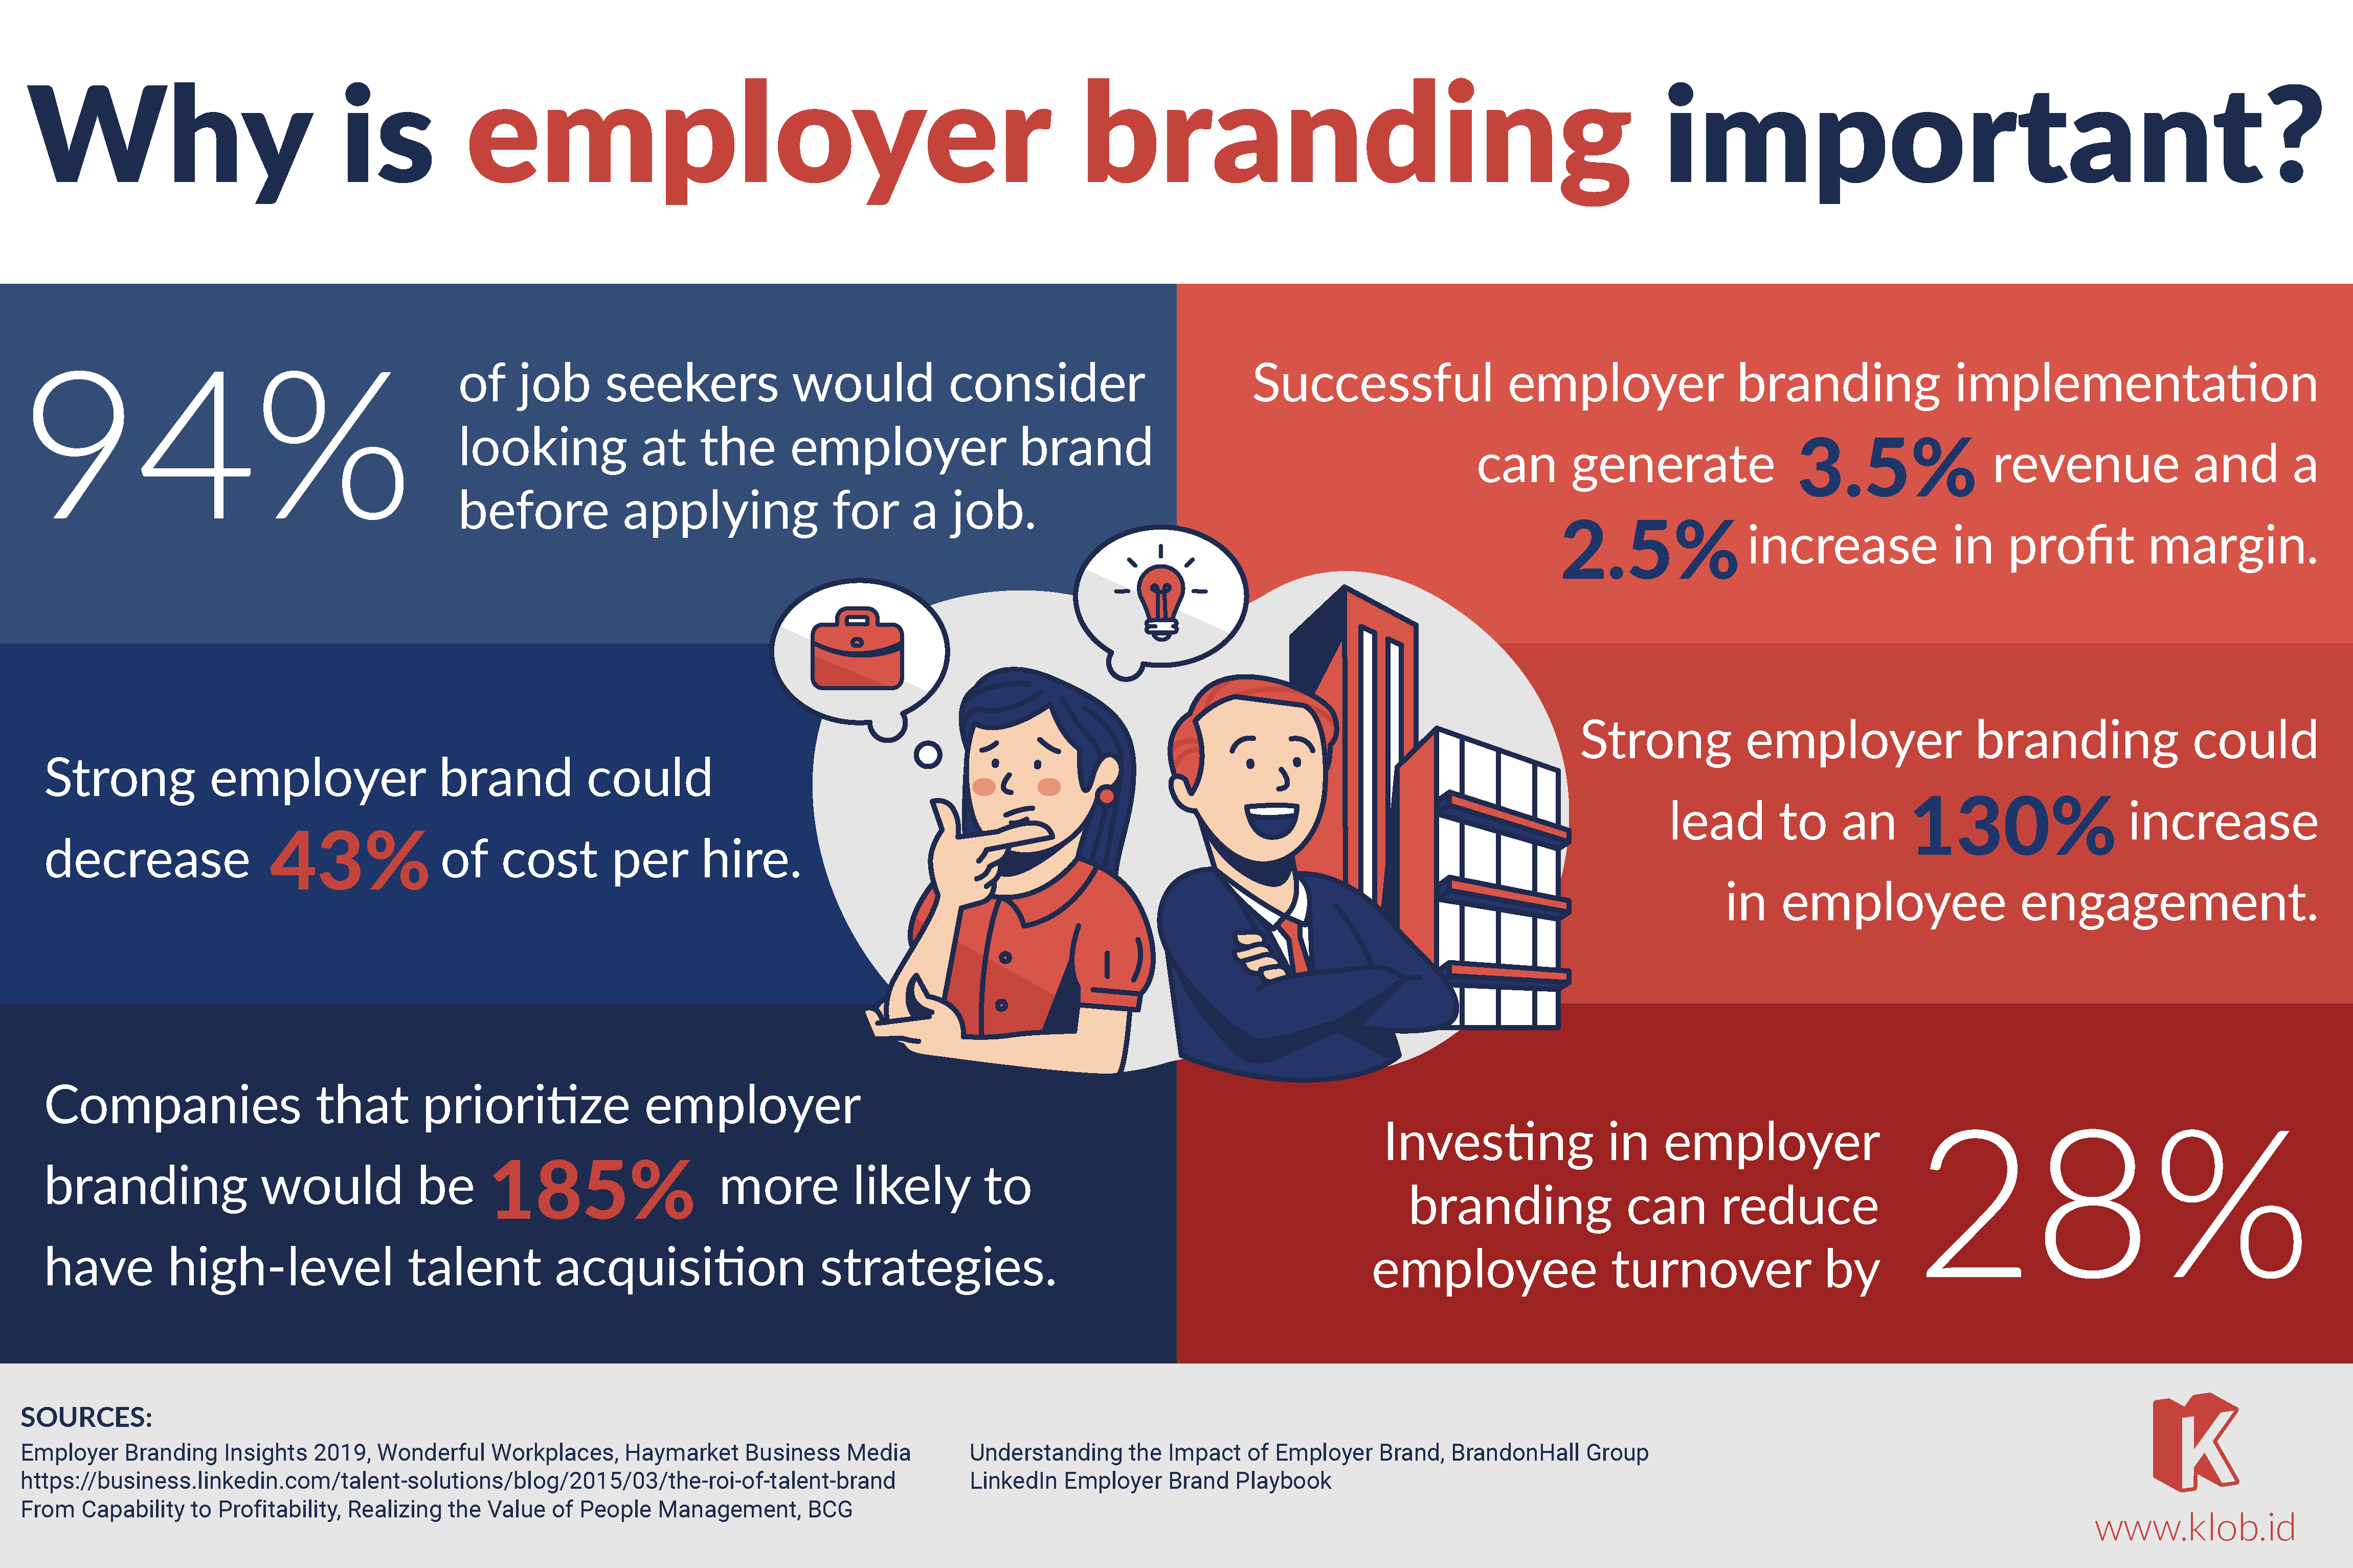 Infographic on the importance of employer branding